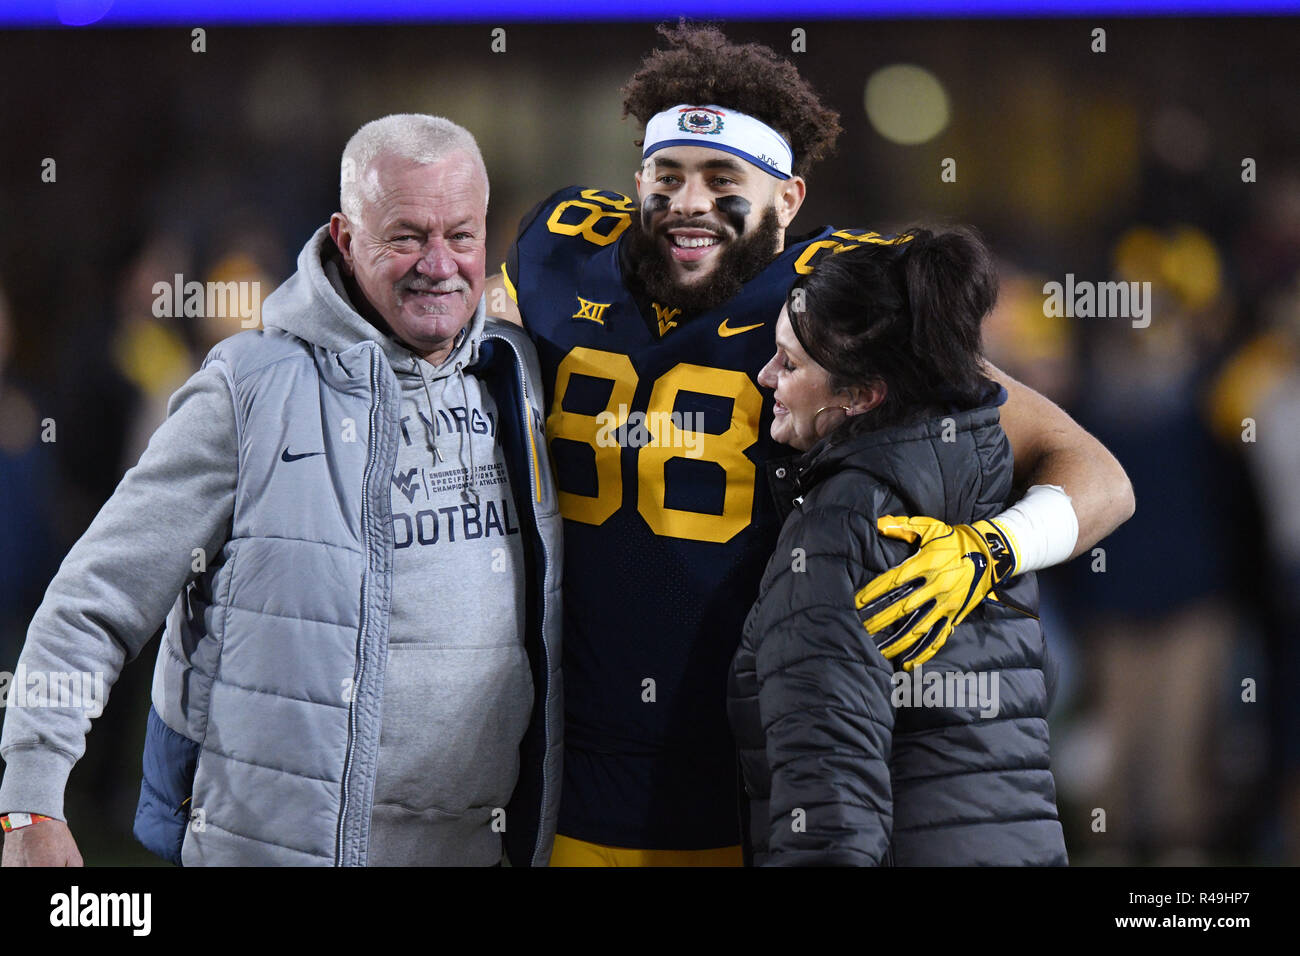 Morgantown, West Virginia, USA. 23rd Nov, 2018. West Virginia Mountaineers tight end TREVON WESCO (88) is introduced, with his family, on senior night prior to the Big 12 football game played at Mountaineer Field in Morgantown, WV. Oklahoma beat WVU 59-56 to secure a spot in the Big 12 Championship game. Credit: Ken Inness/ZUMA Wire/Alamy Live News Stock Photo